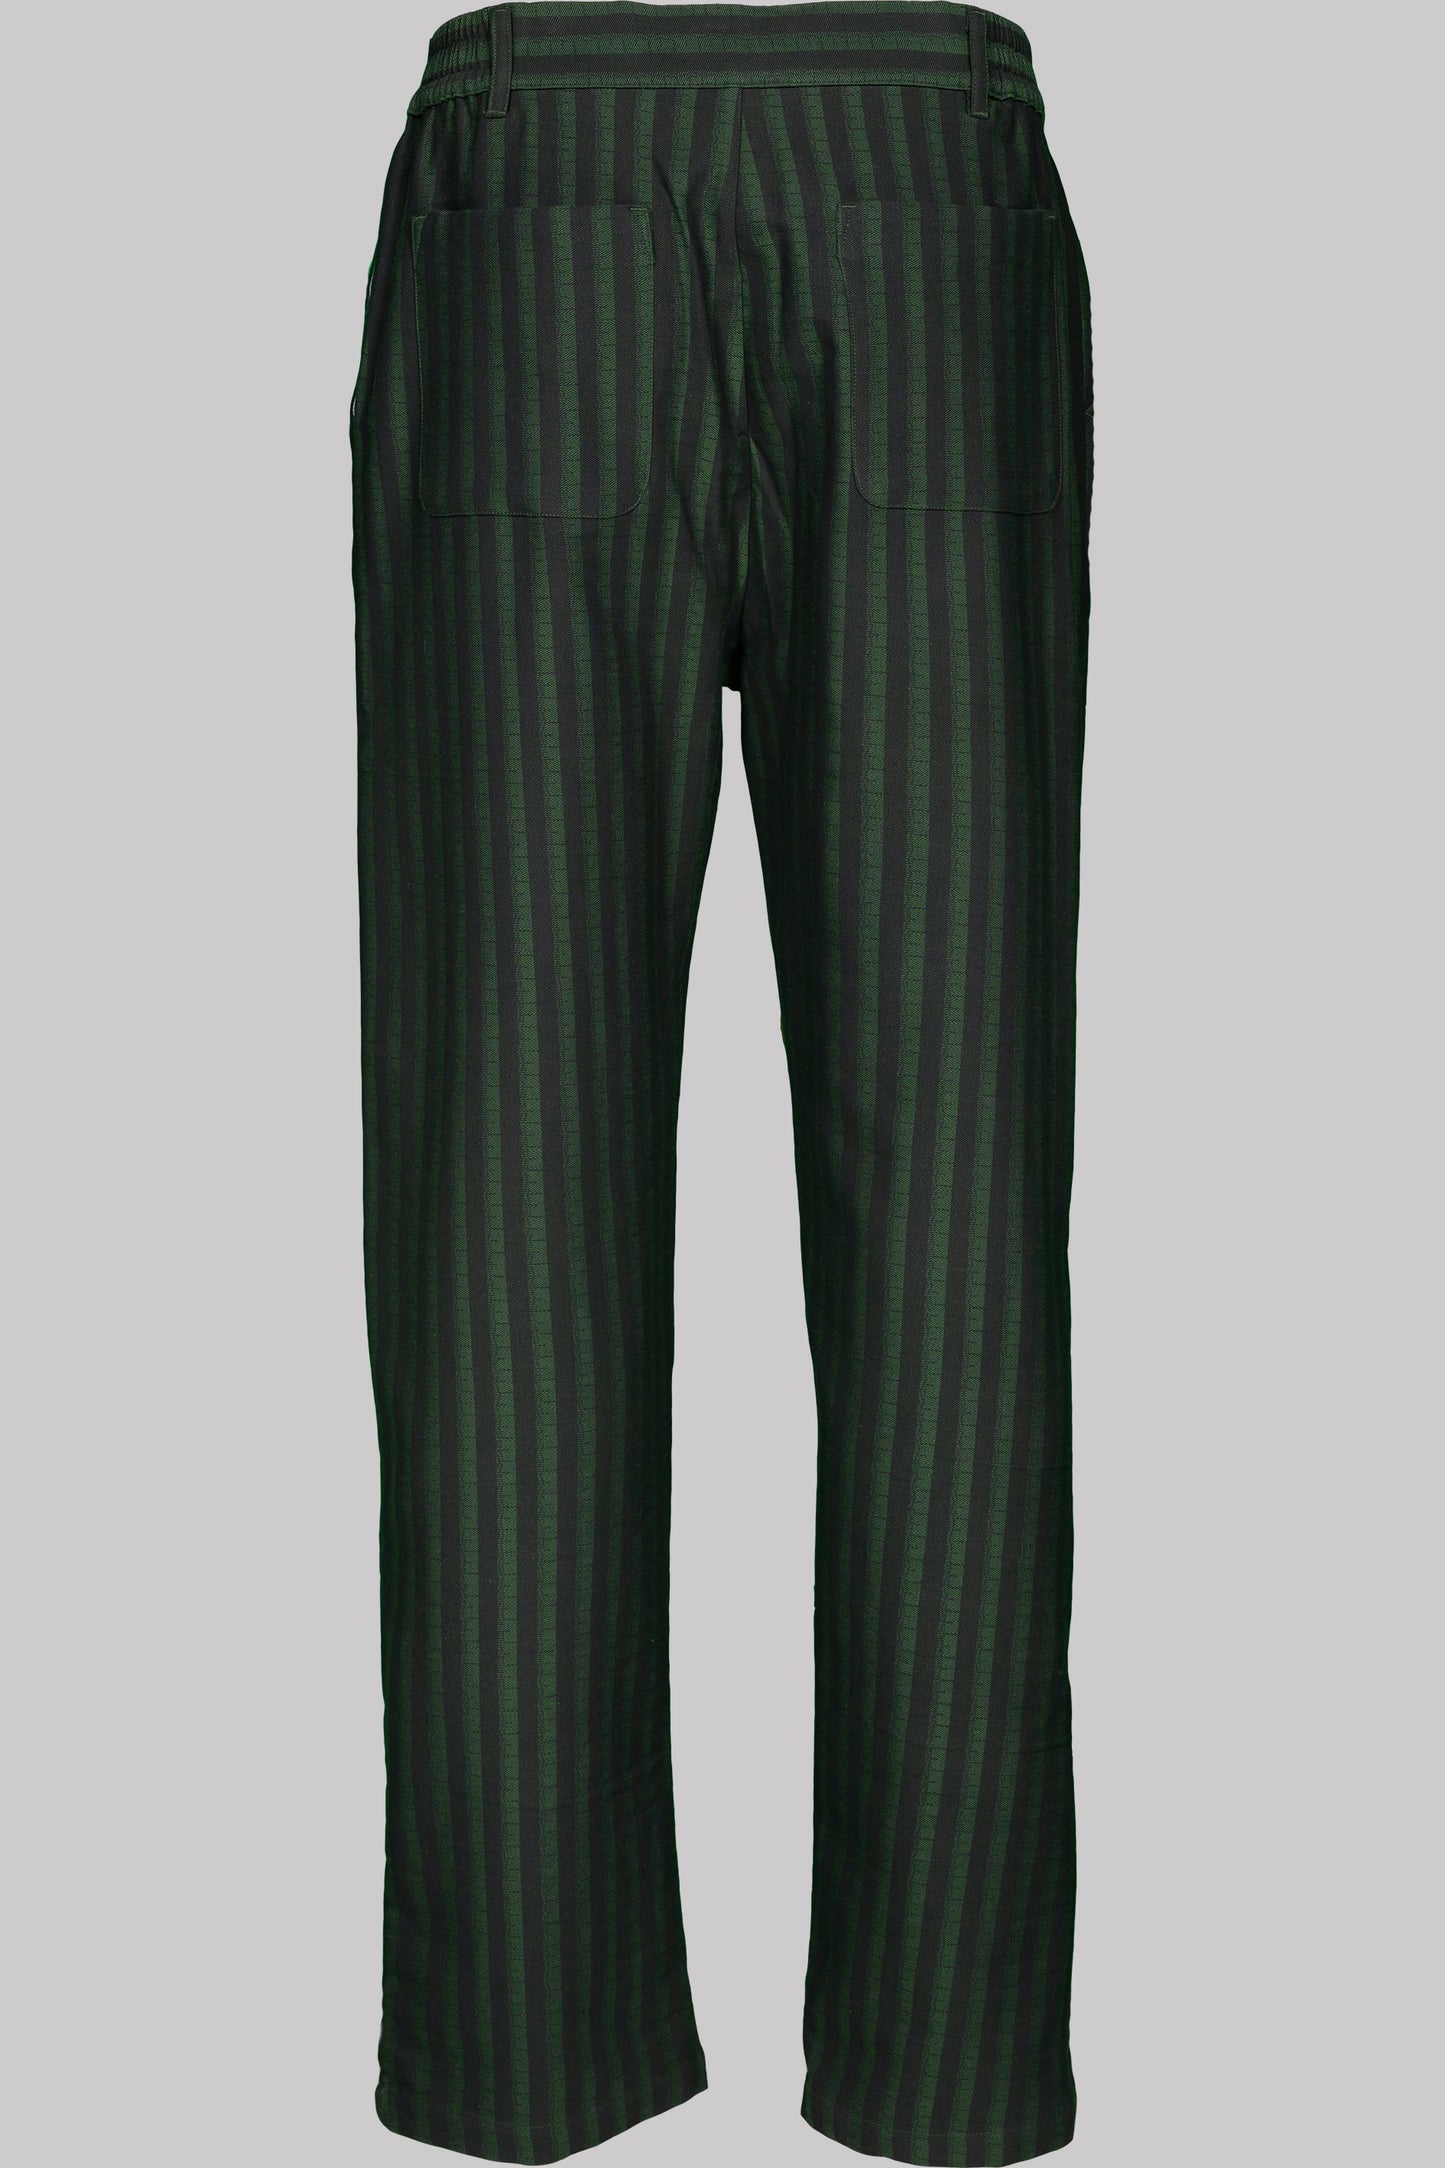 BUTTON-TROUSERS PEACOCKGREEN-Black 100% COTTON Herringbone-Thick, Brushed-inside Broad-Stripes screen-print